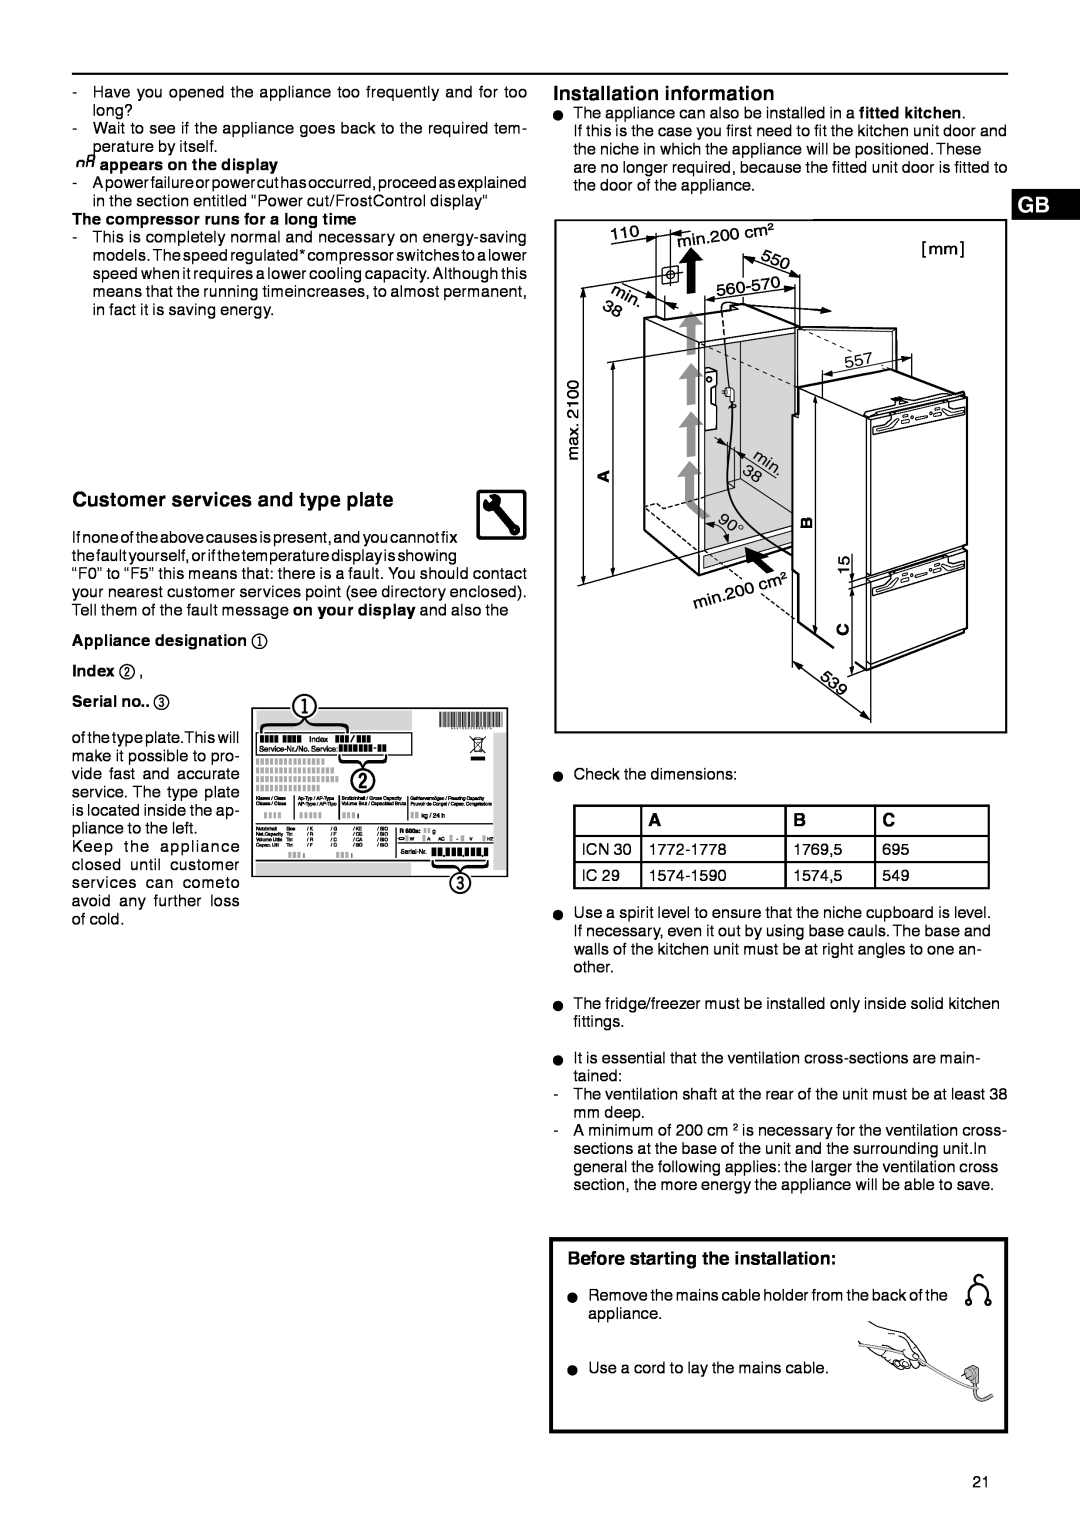 Liebherr 7082 532-00 Customer services and type plate, Installation information, Before starting the installation 